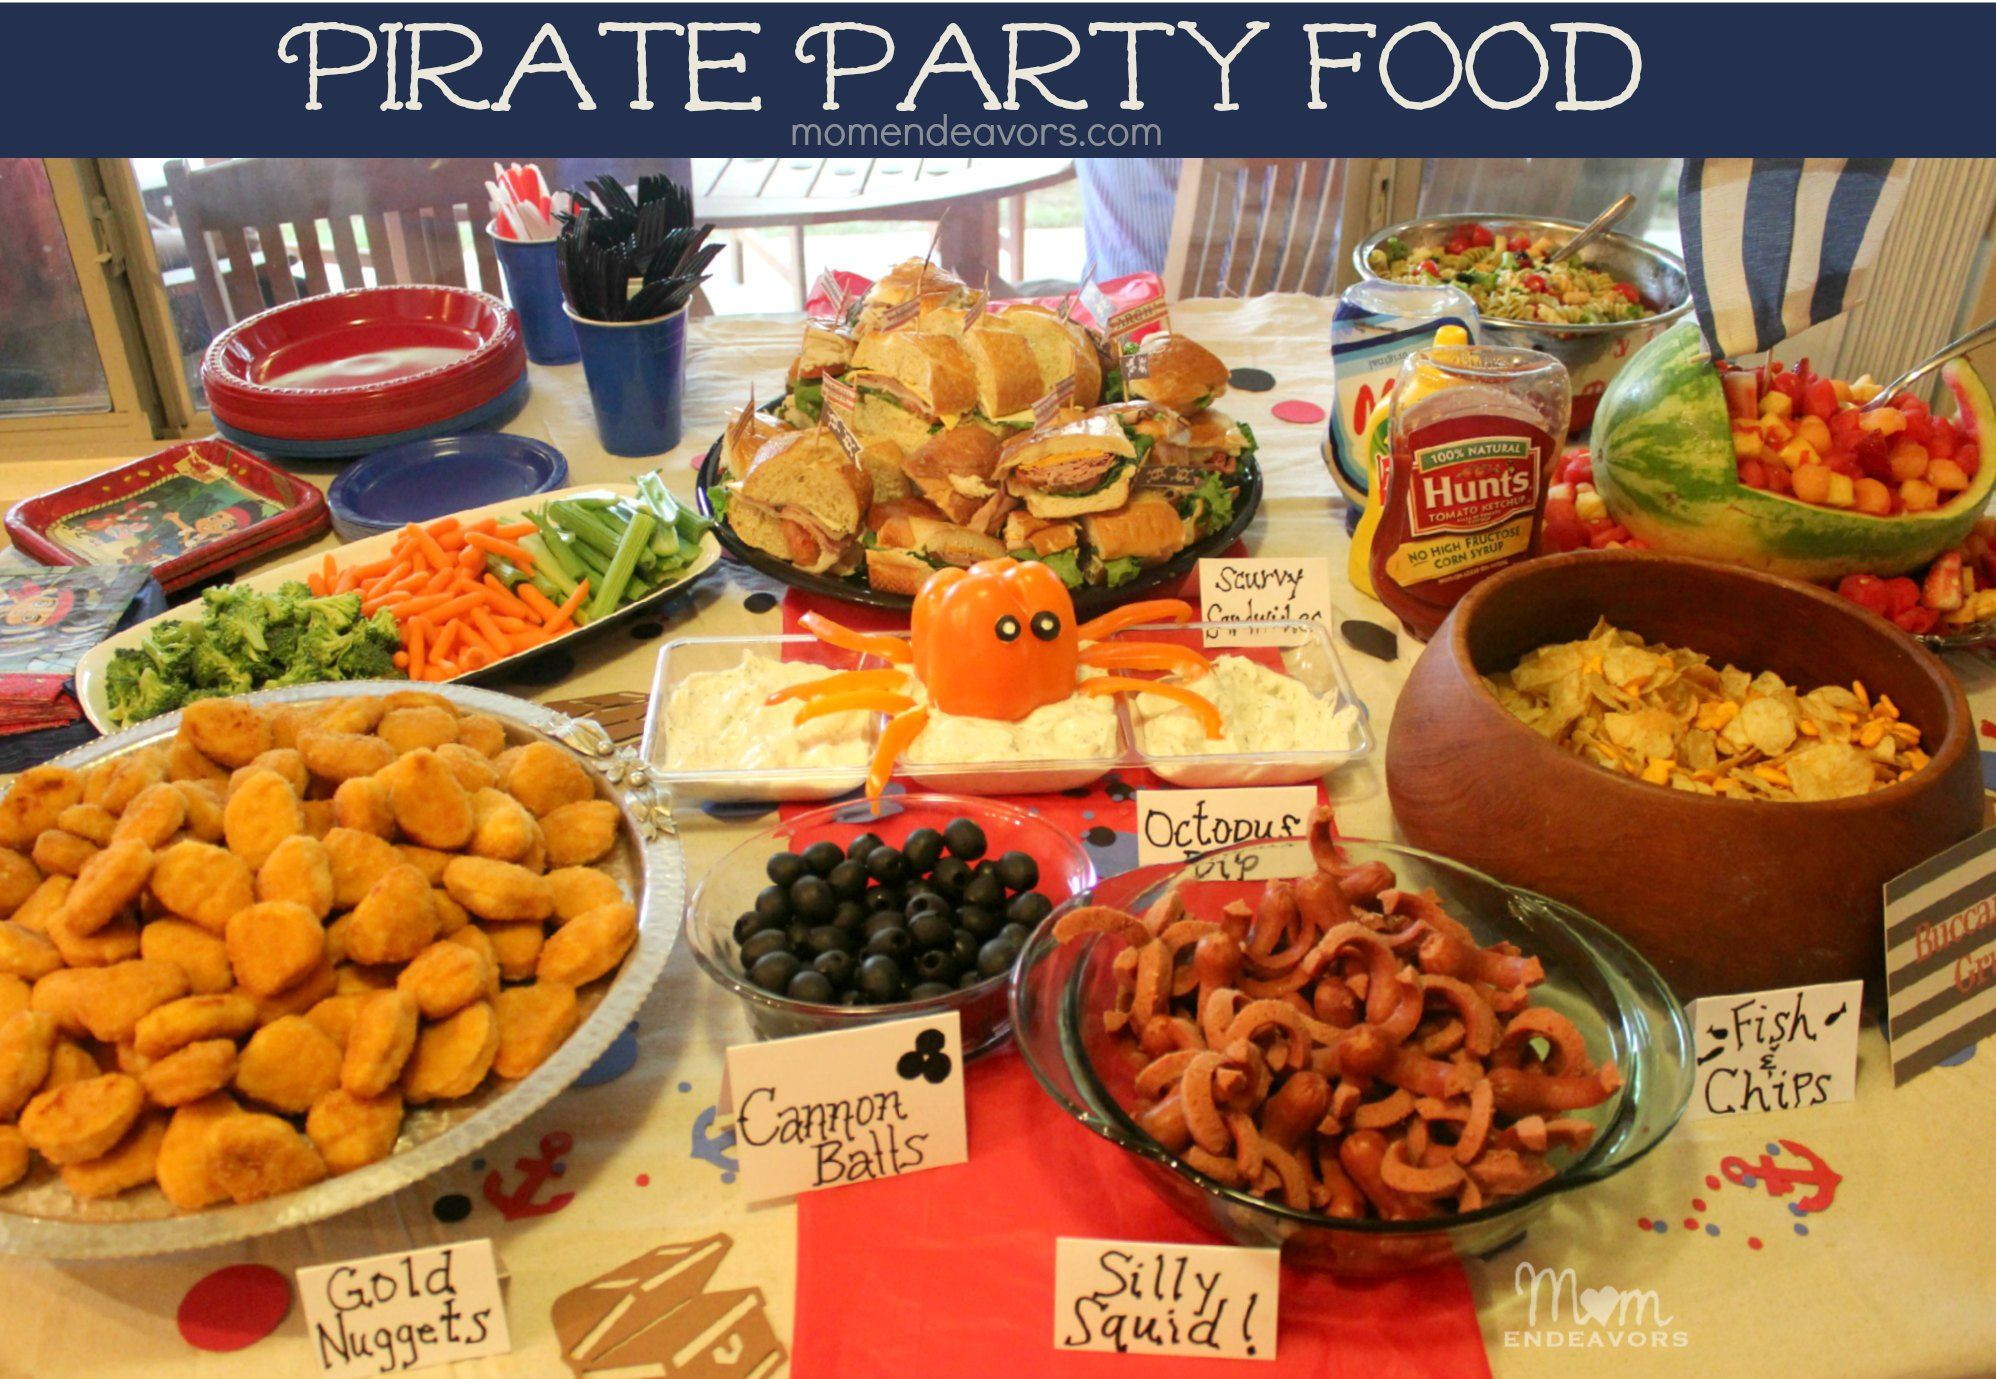 Pirate Birthday Party Food Ideas
 Jake and the Never Land Pirates Birthday Party Food Ideas